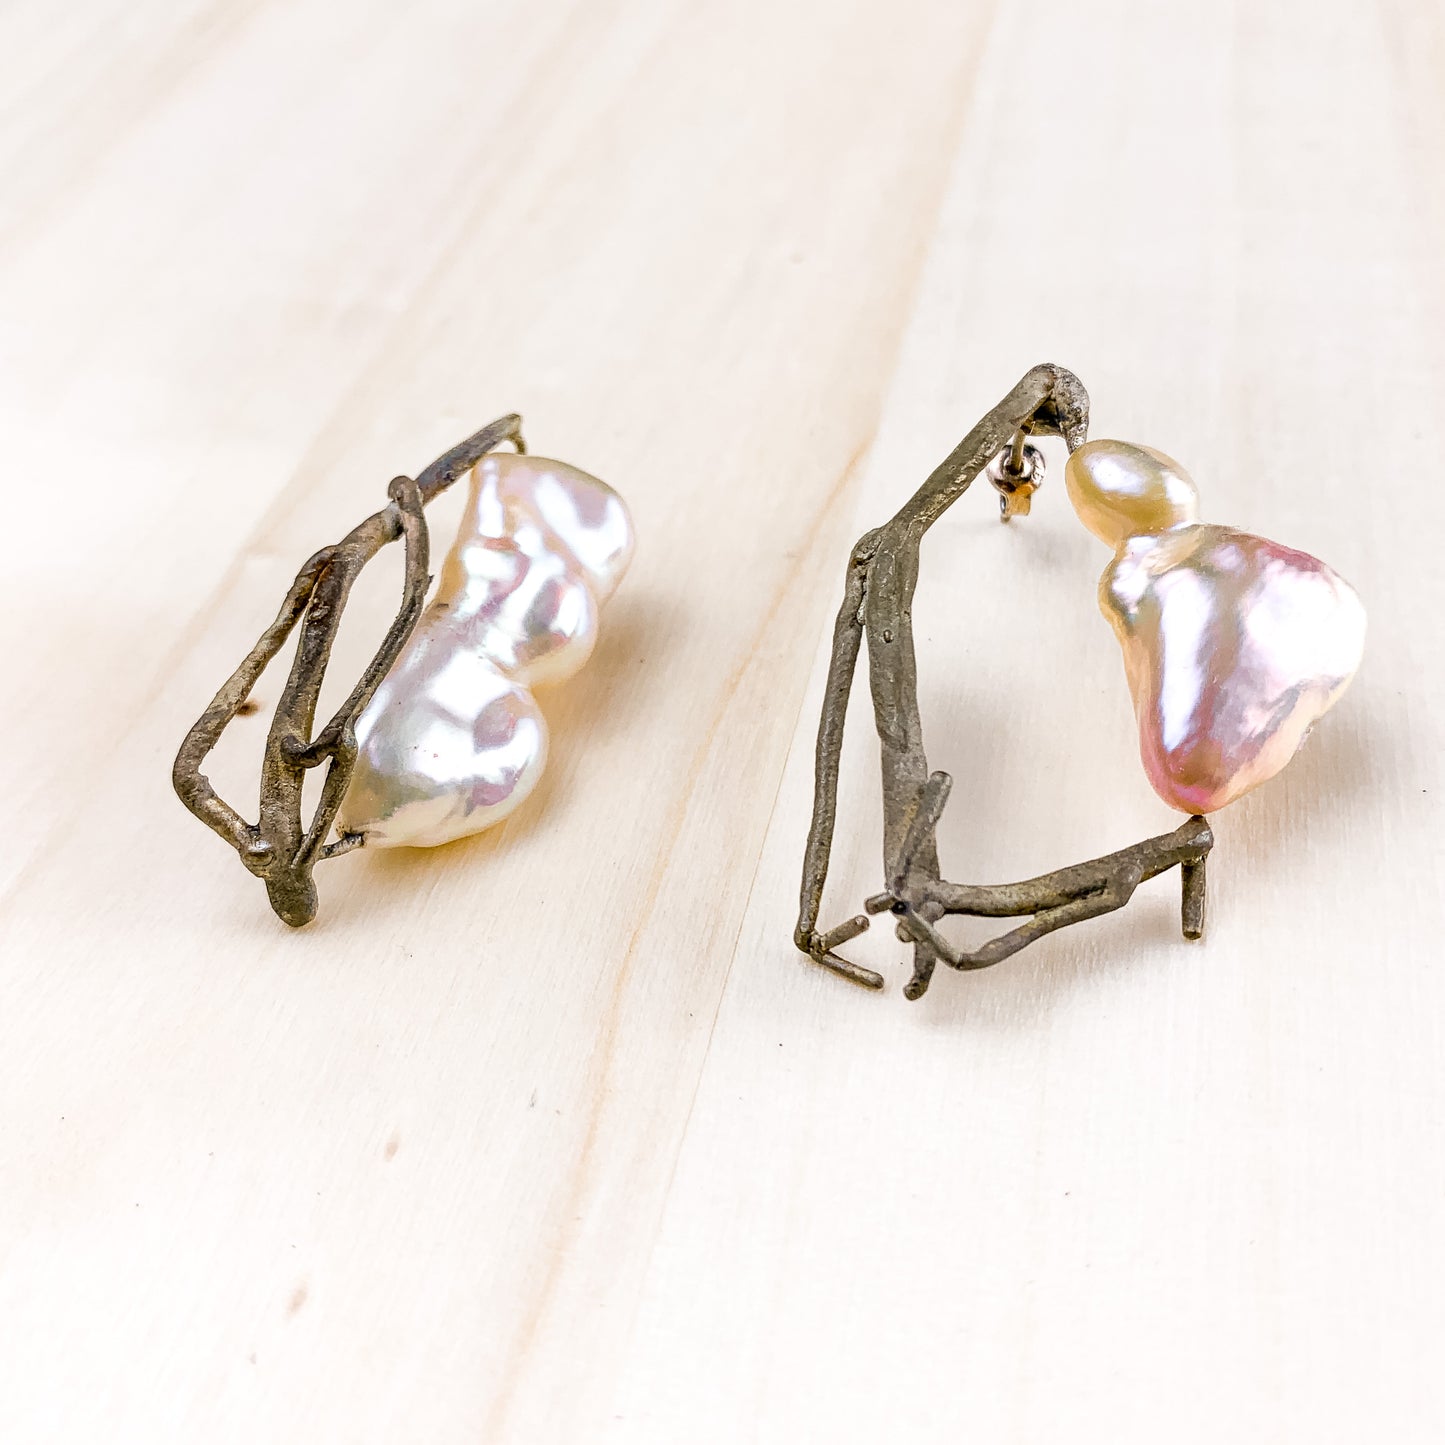 Crystalline creature Earrings with baroque pearls